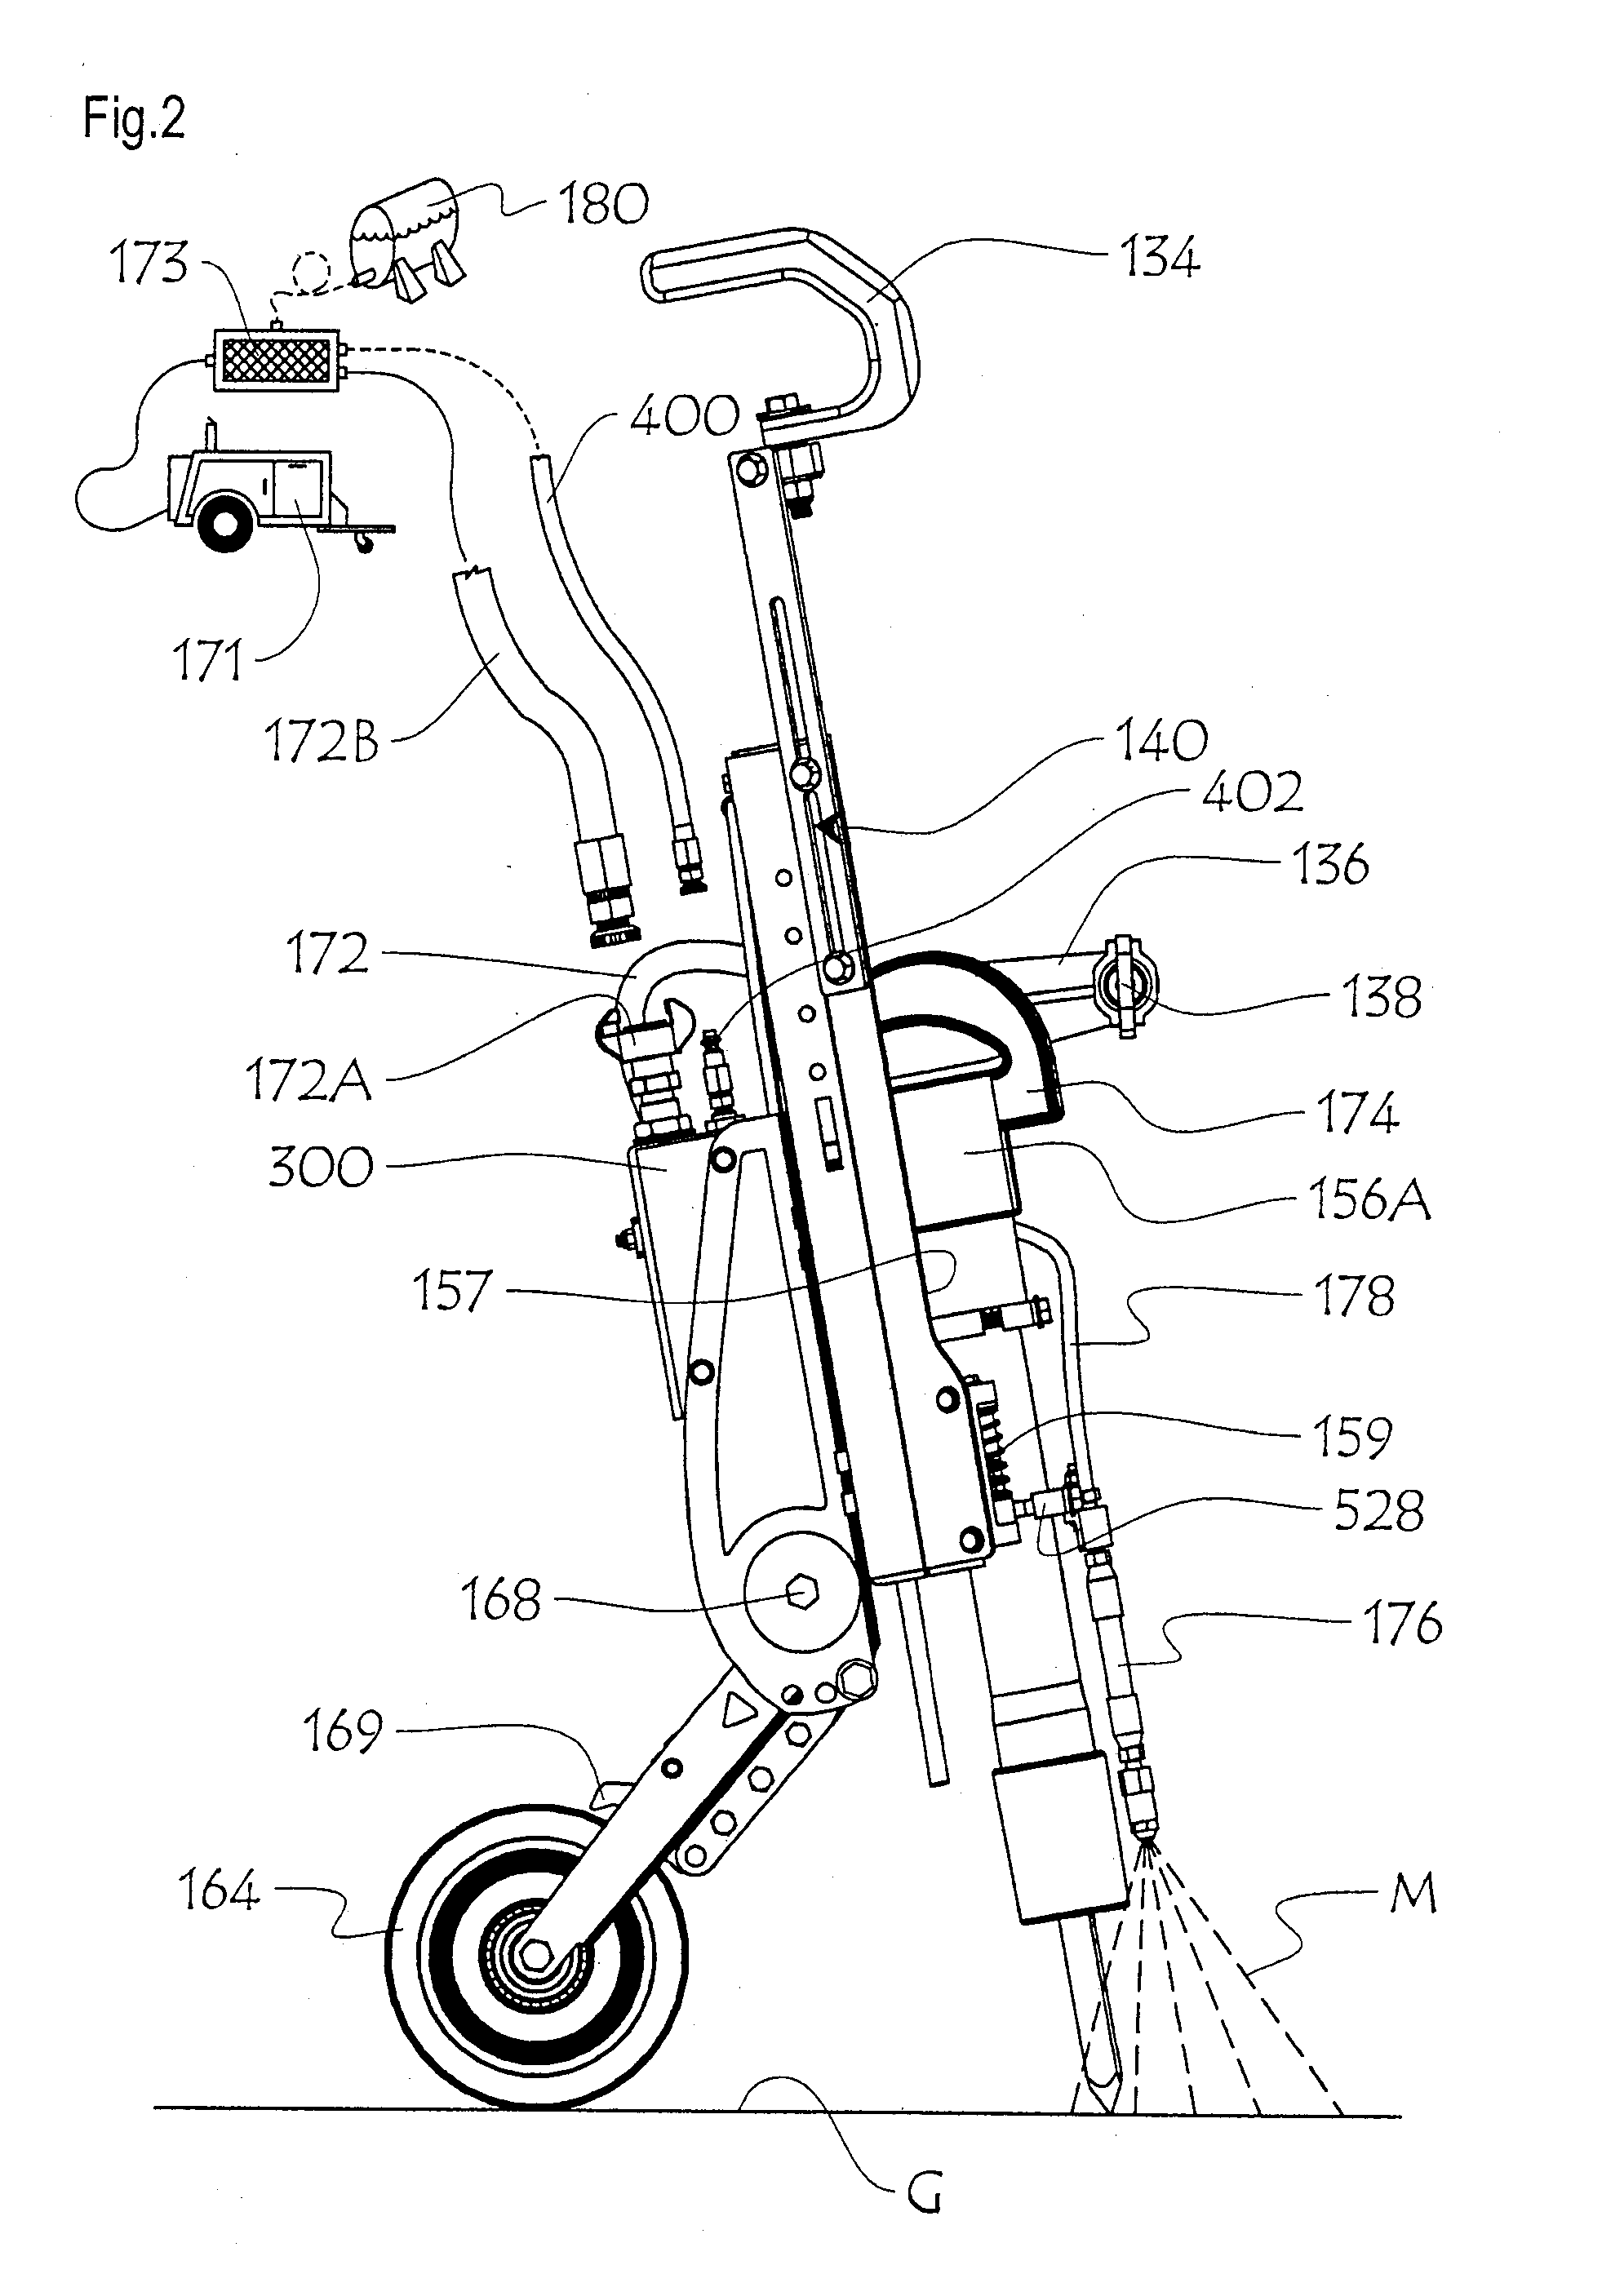 Hand-held ergonomic jackhammer holder for concrete floor chipping, jackhammer and holder assembly, and method of use thereof